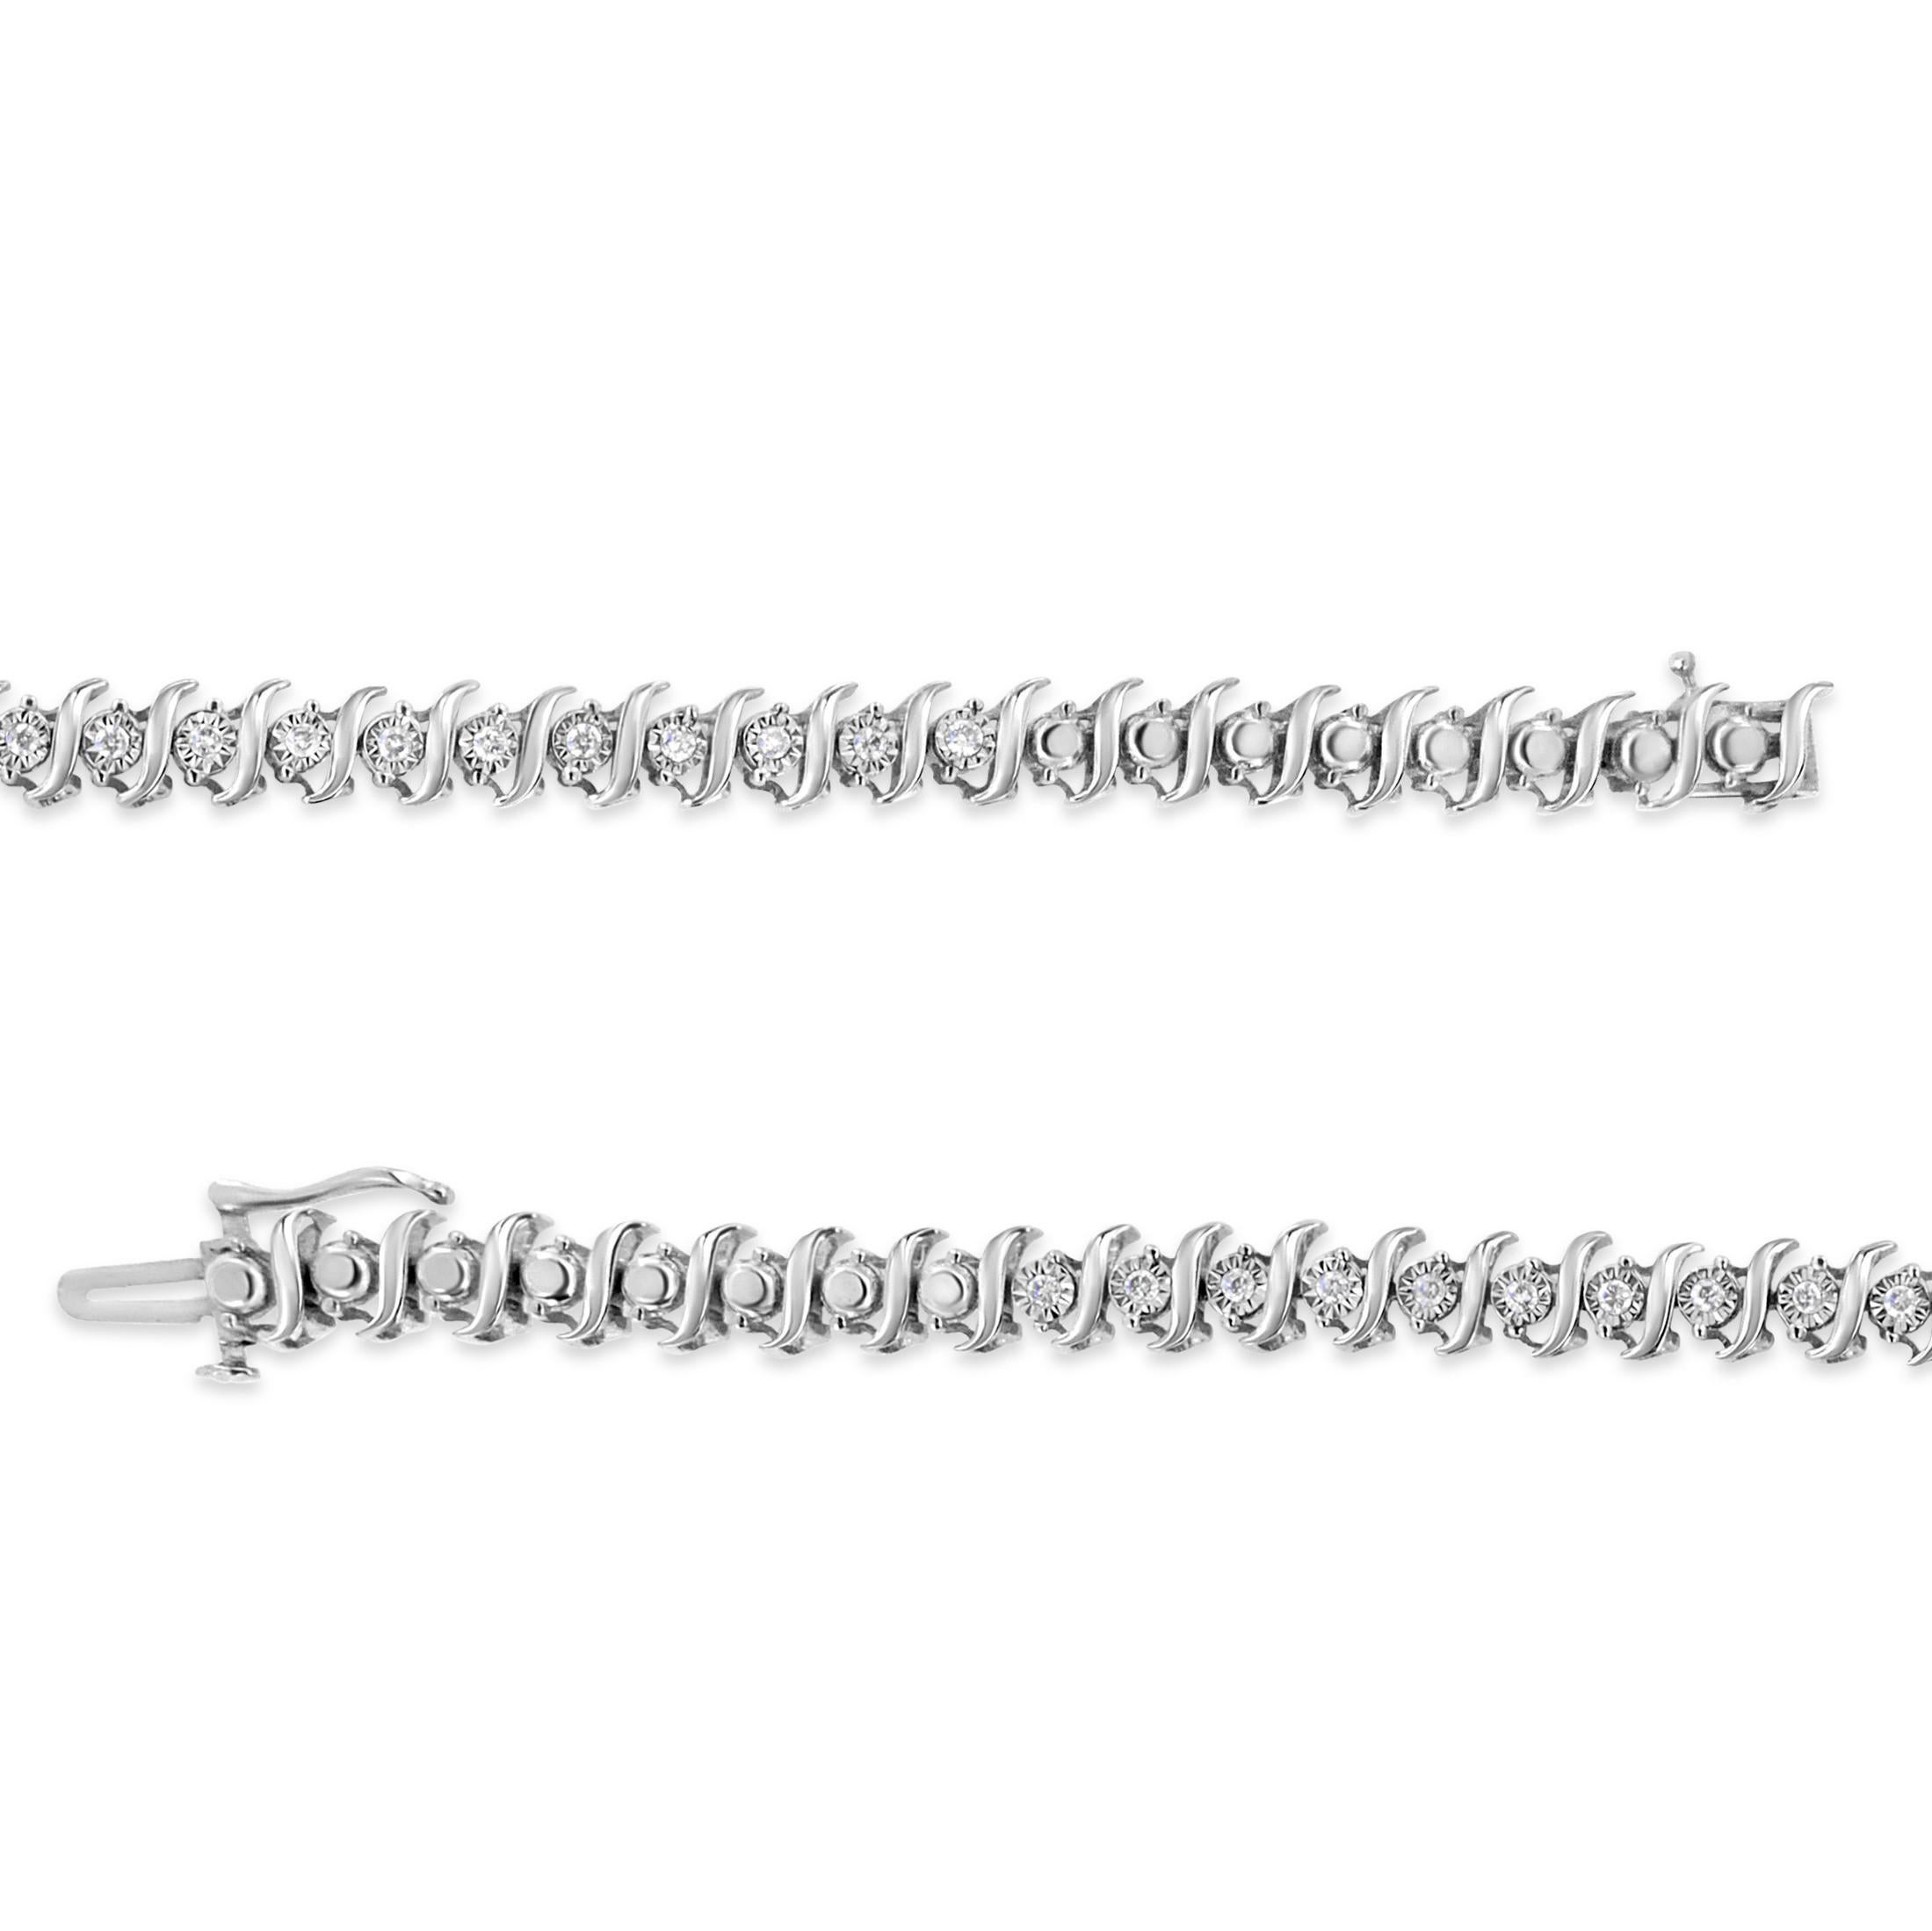 Adorn yourself with this everlasting silver link bracelet. Silver 